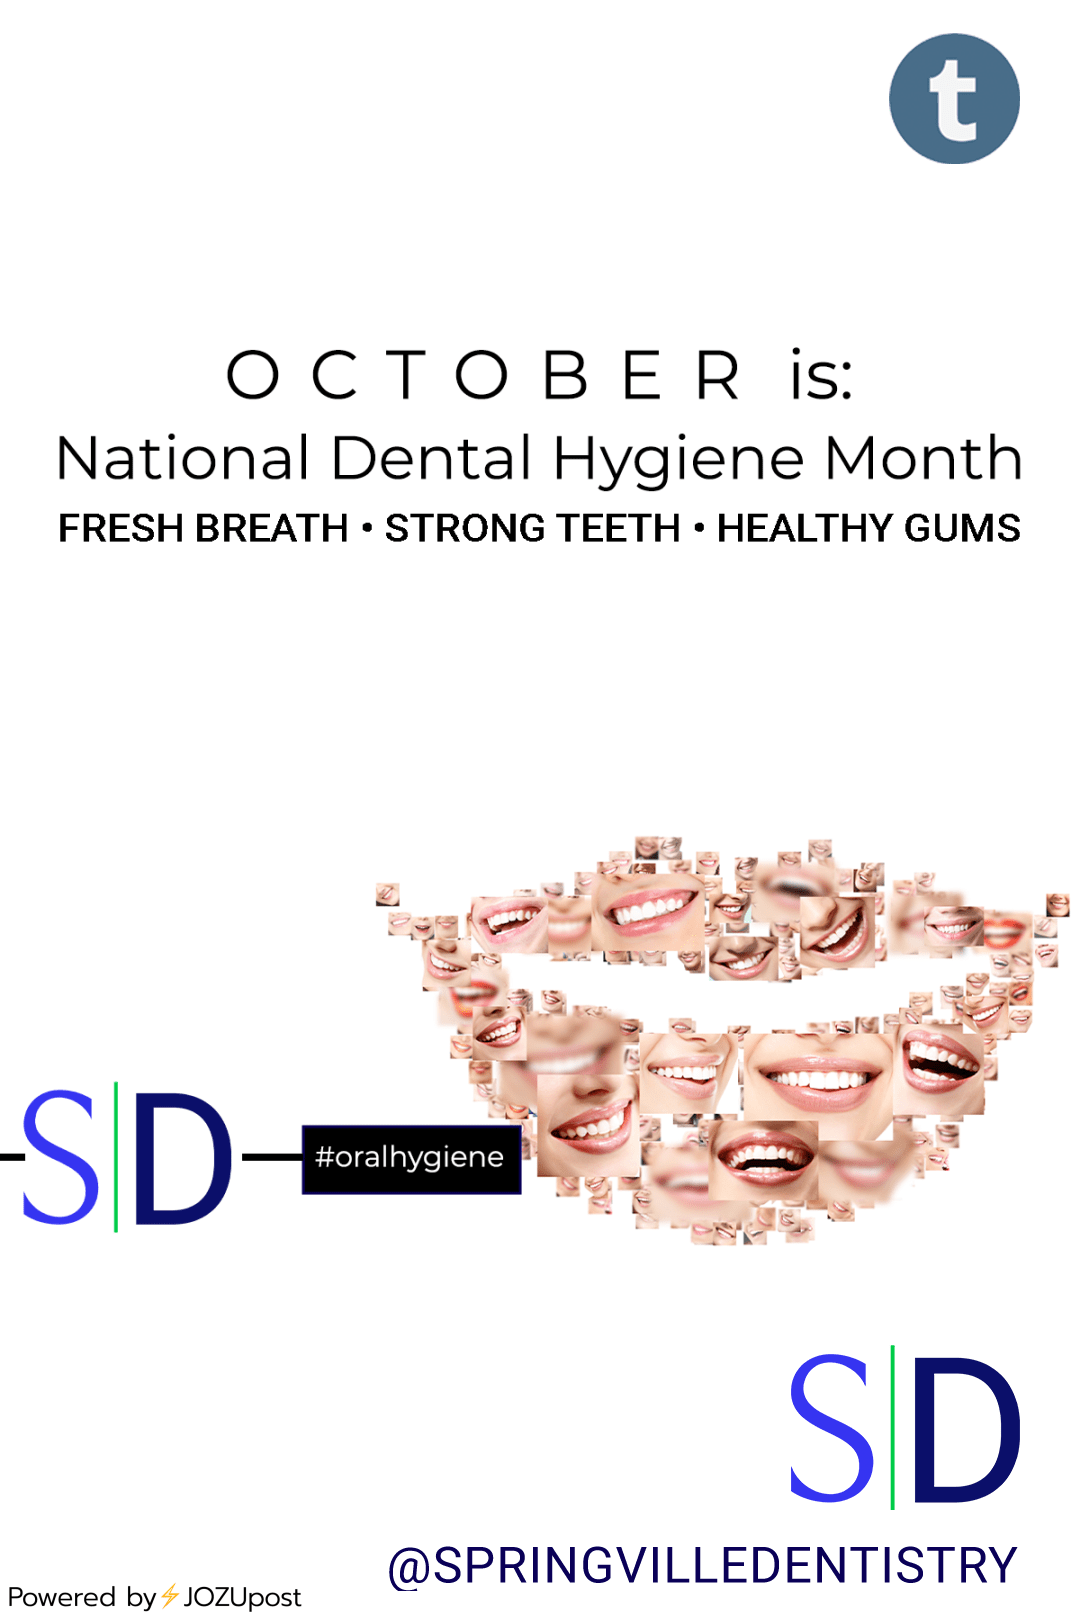 October is National Dental Hygiene Month. Fresh breath, Strong Teeth and Healthy Gums are all part of Oral Health.
Call Springville Dentistry to set up your next cleaning and checkup appointment.
Phone: 801-489-9456 |...